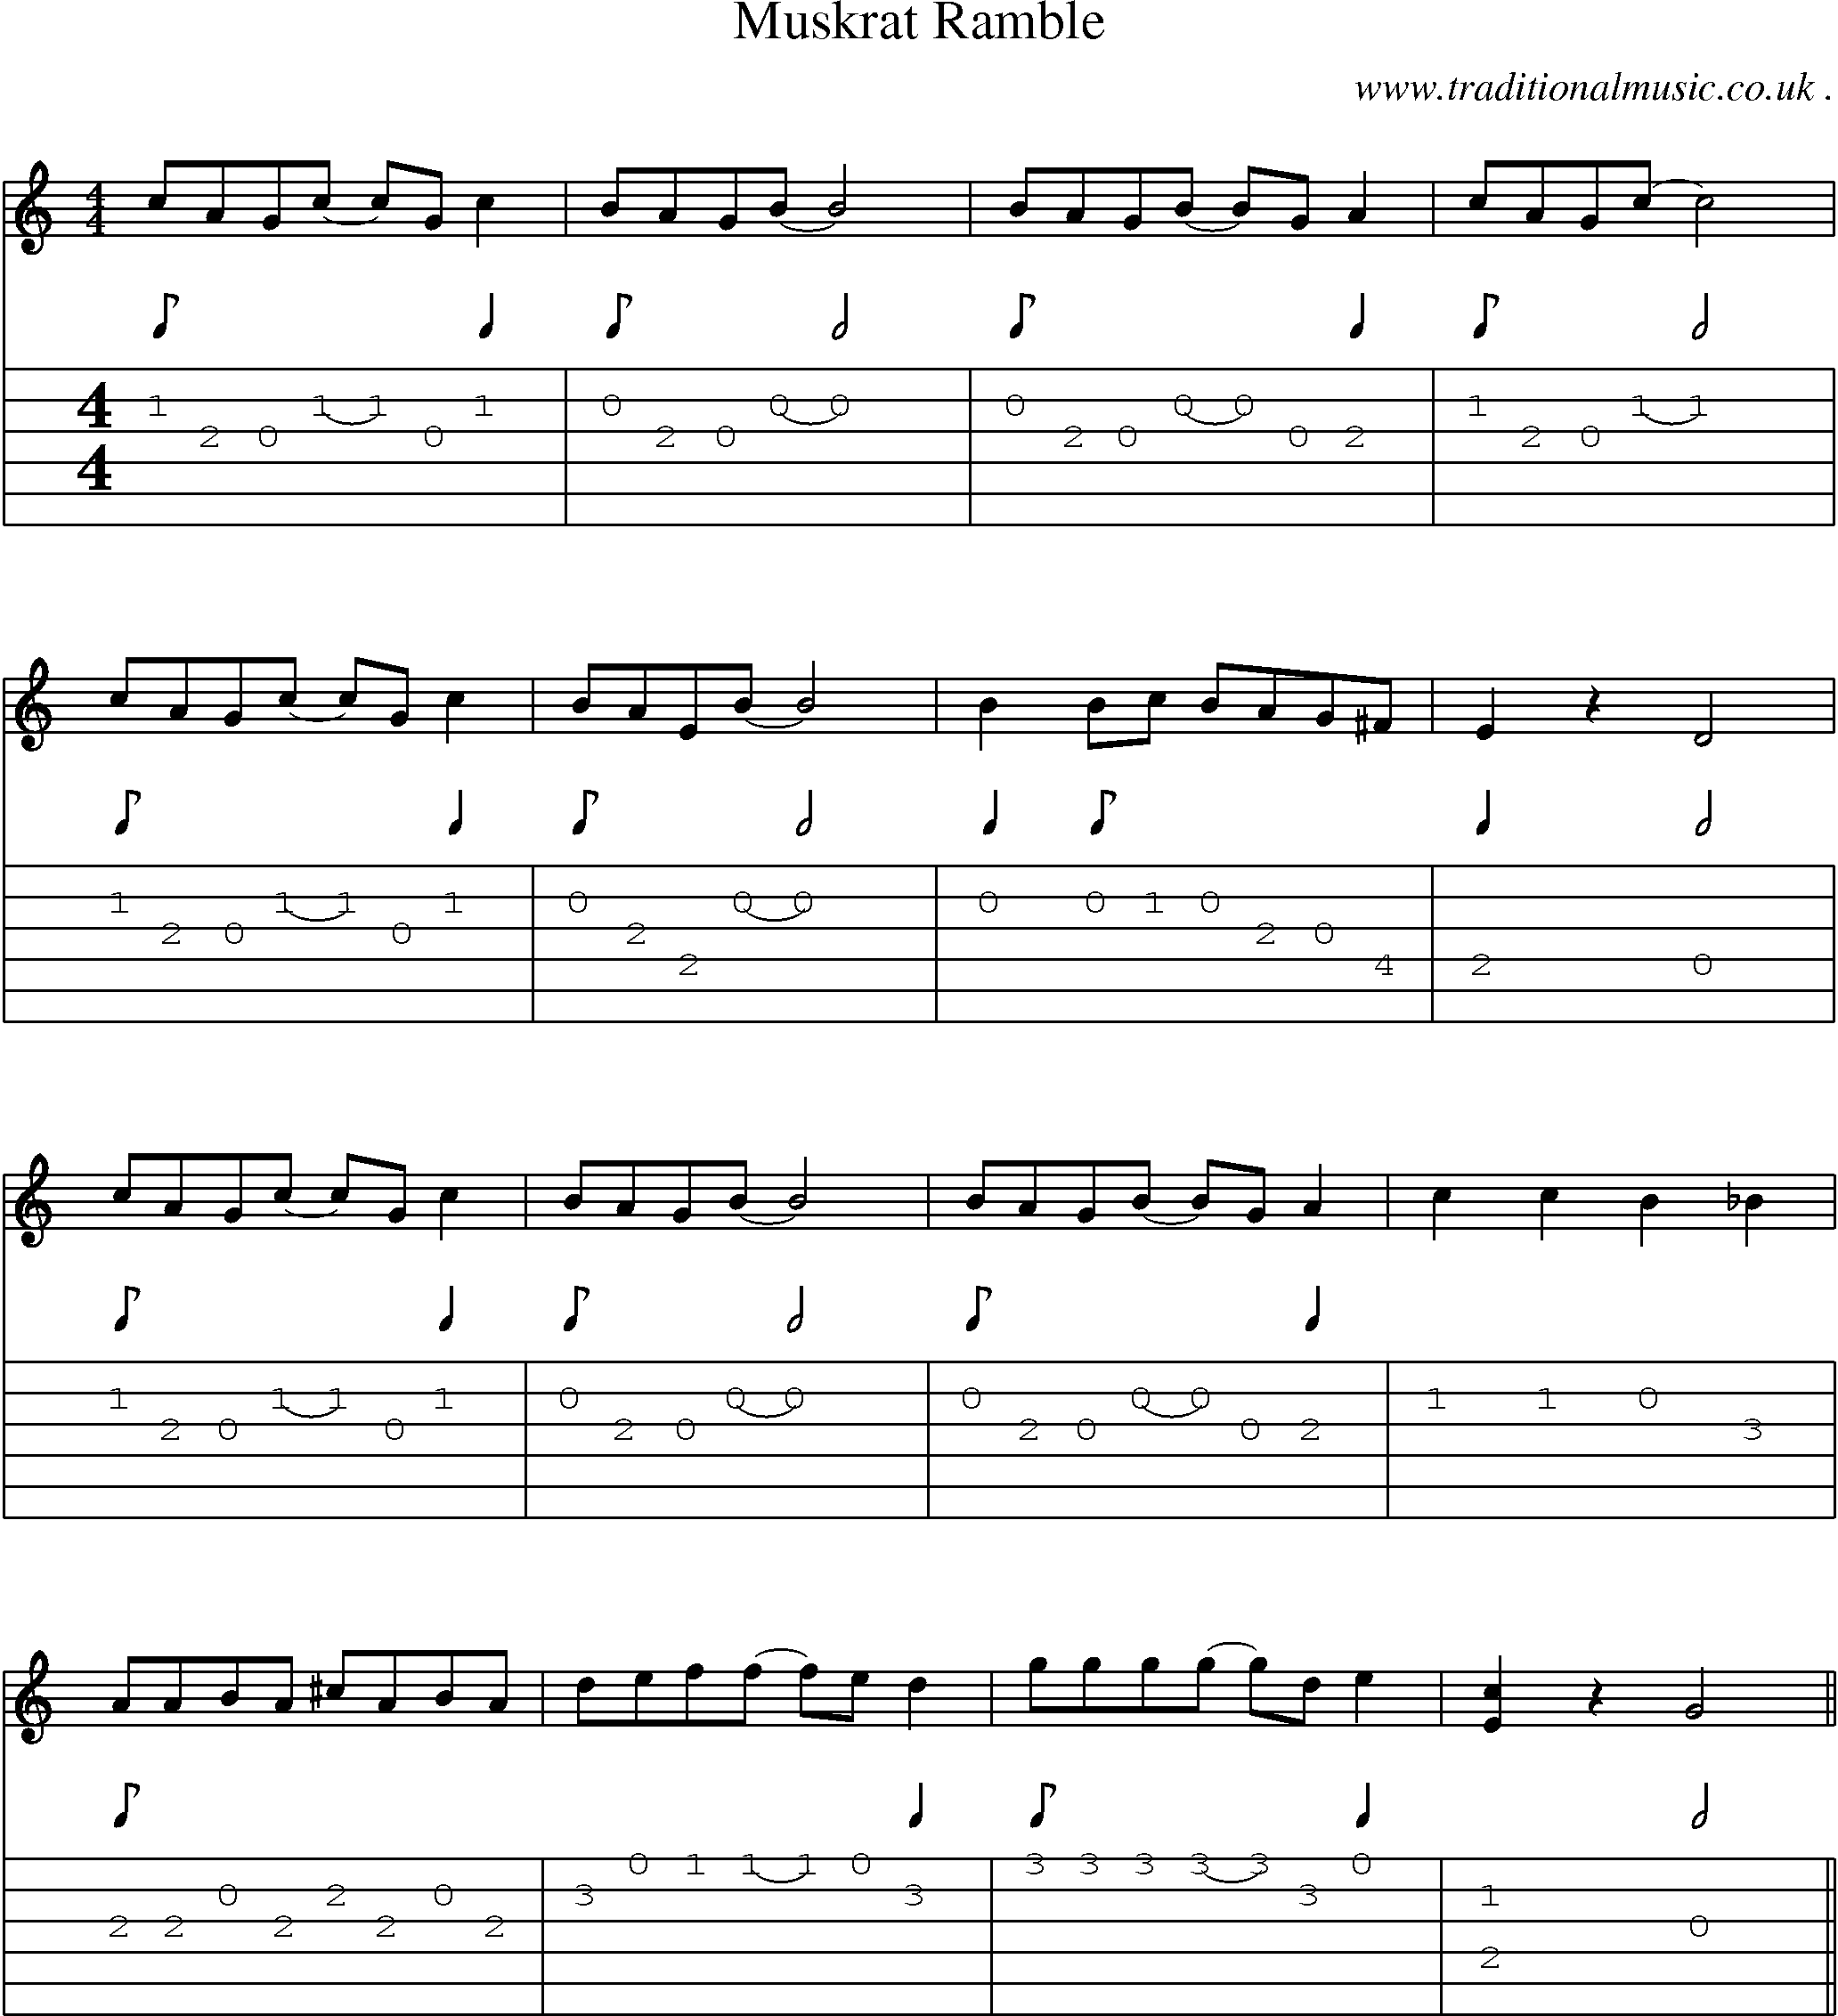 Music Score and Guitar Tabs for Muskrat Ramble